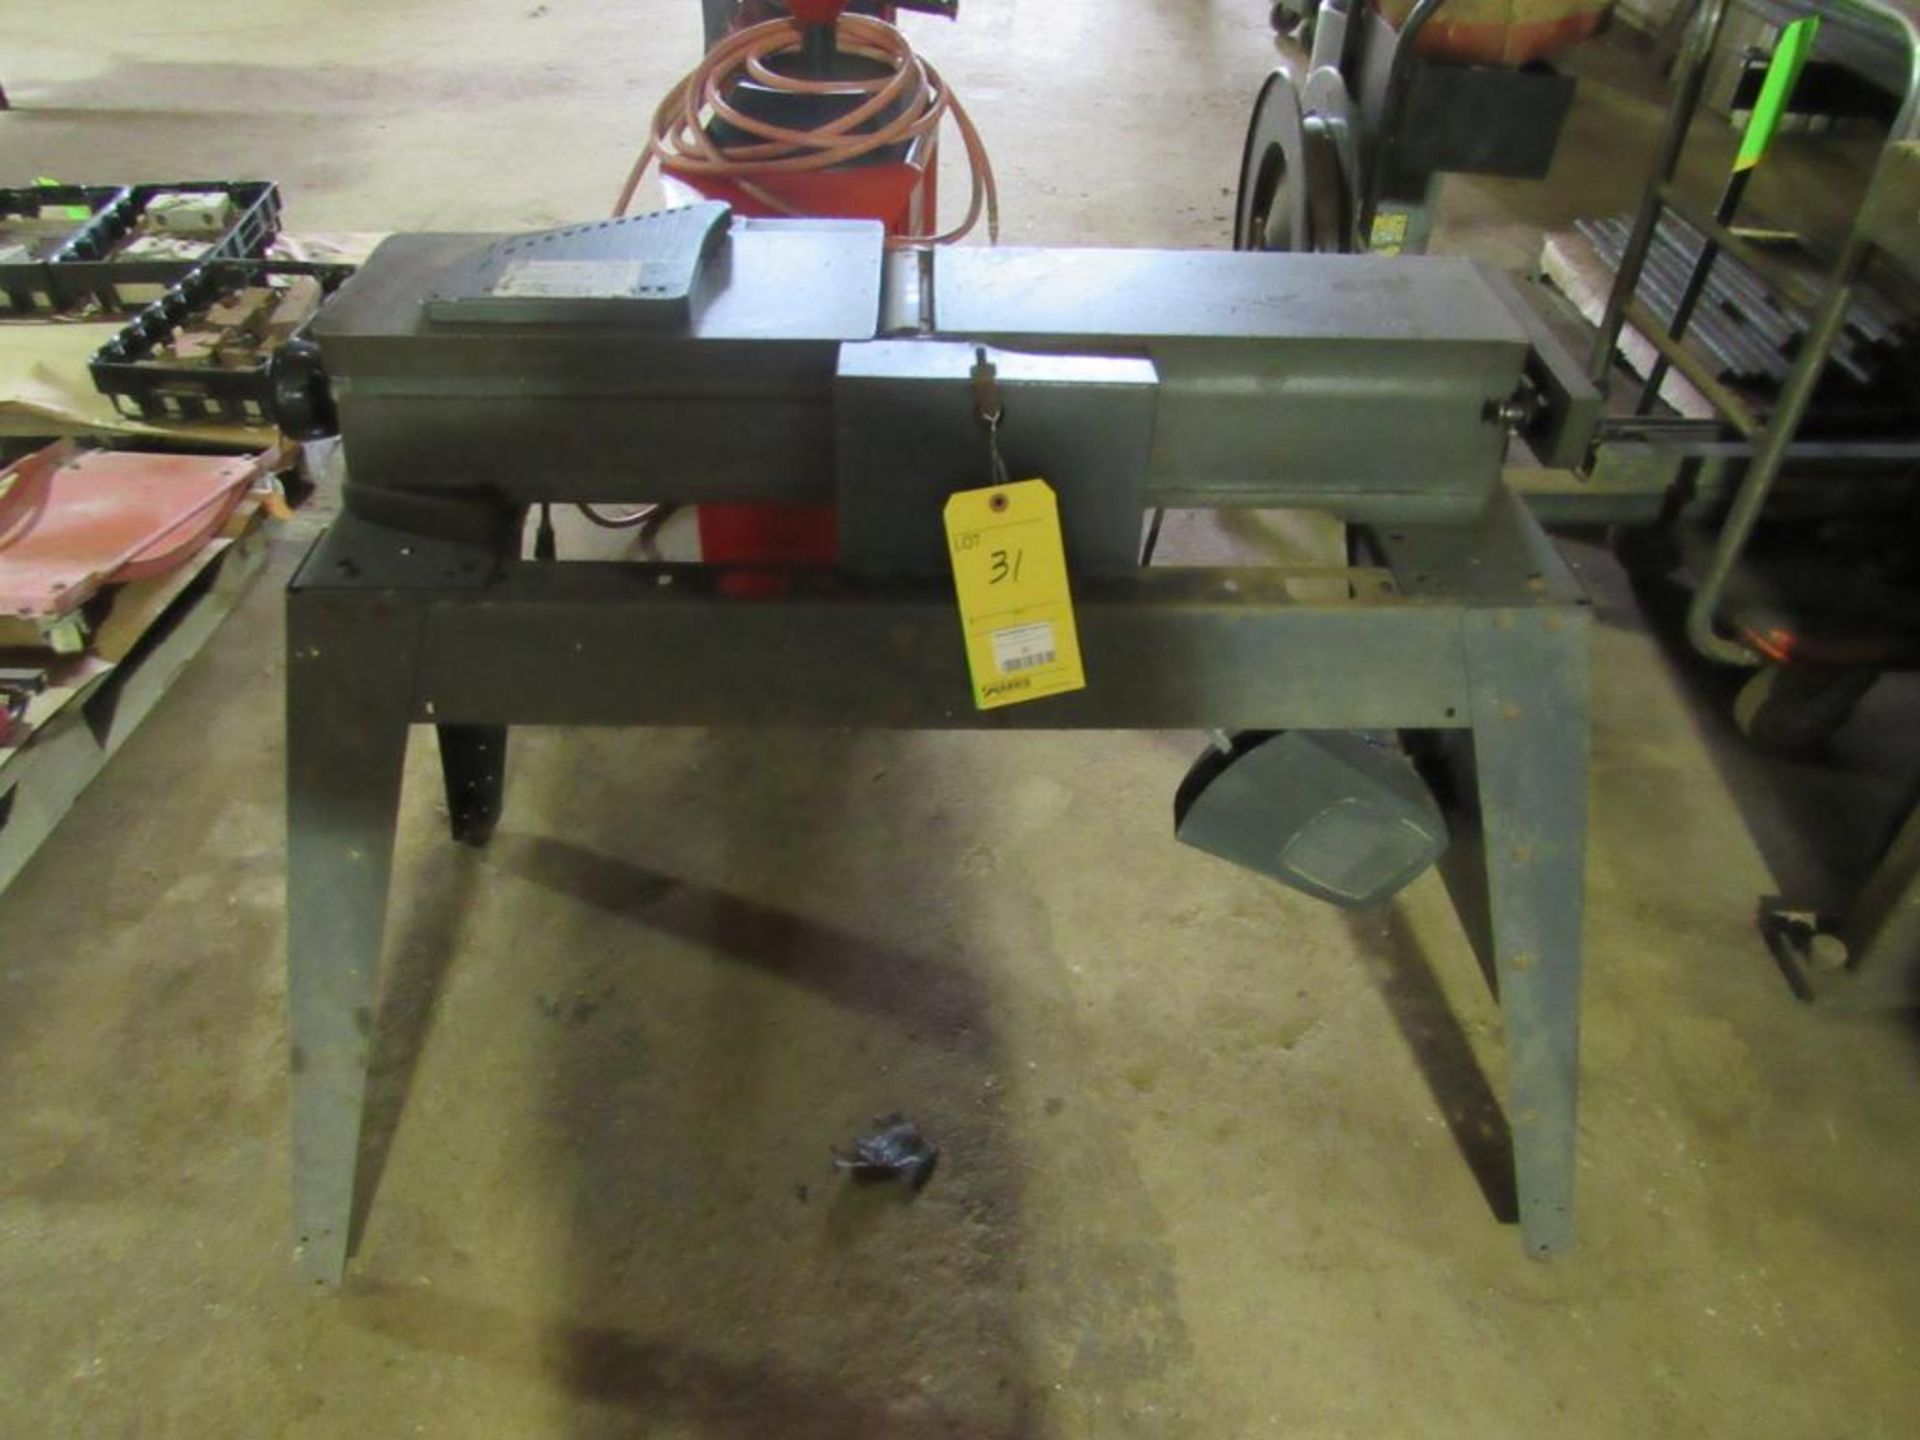 Sears Craftsman Model 113.206932 6-1/8" Jointer-Planer on A-Frame Stand